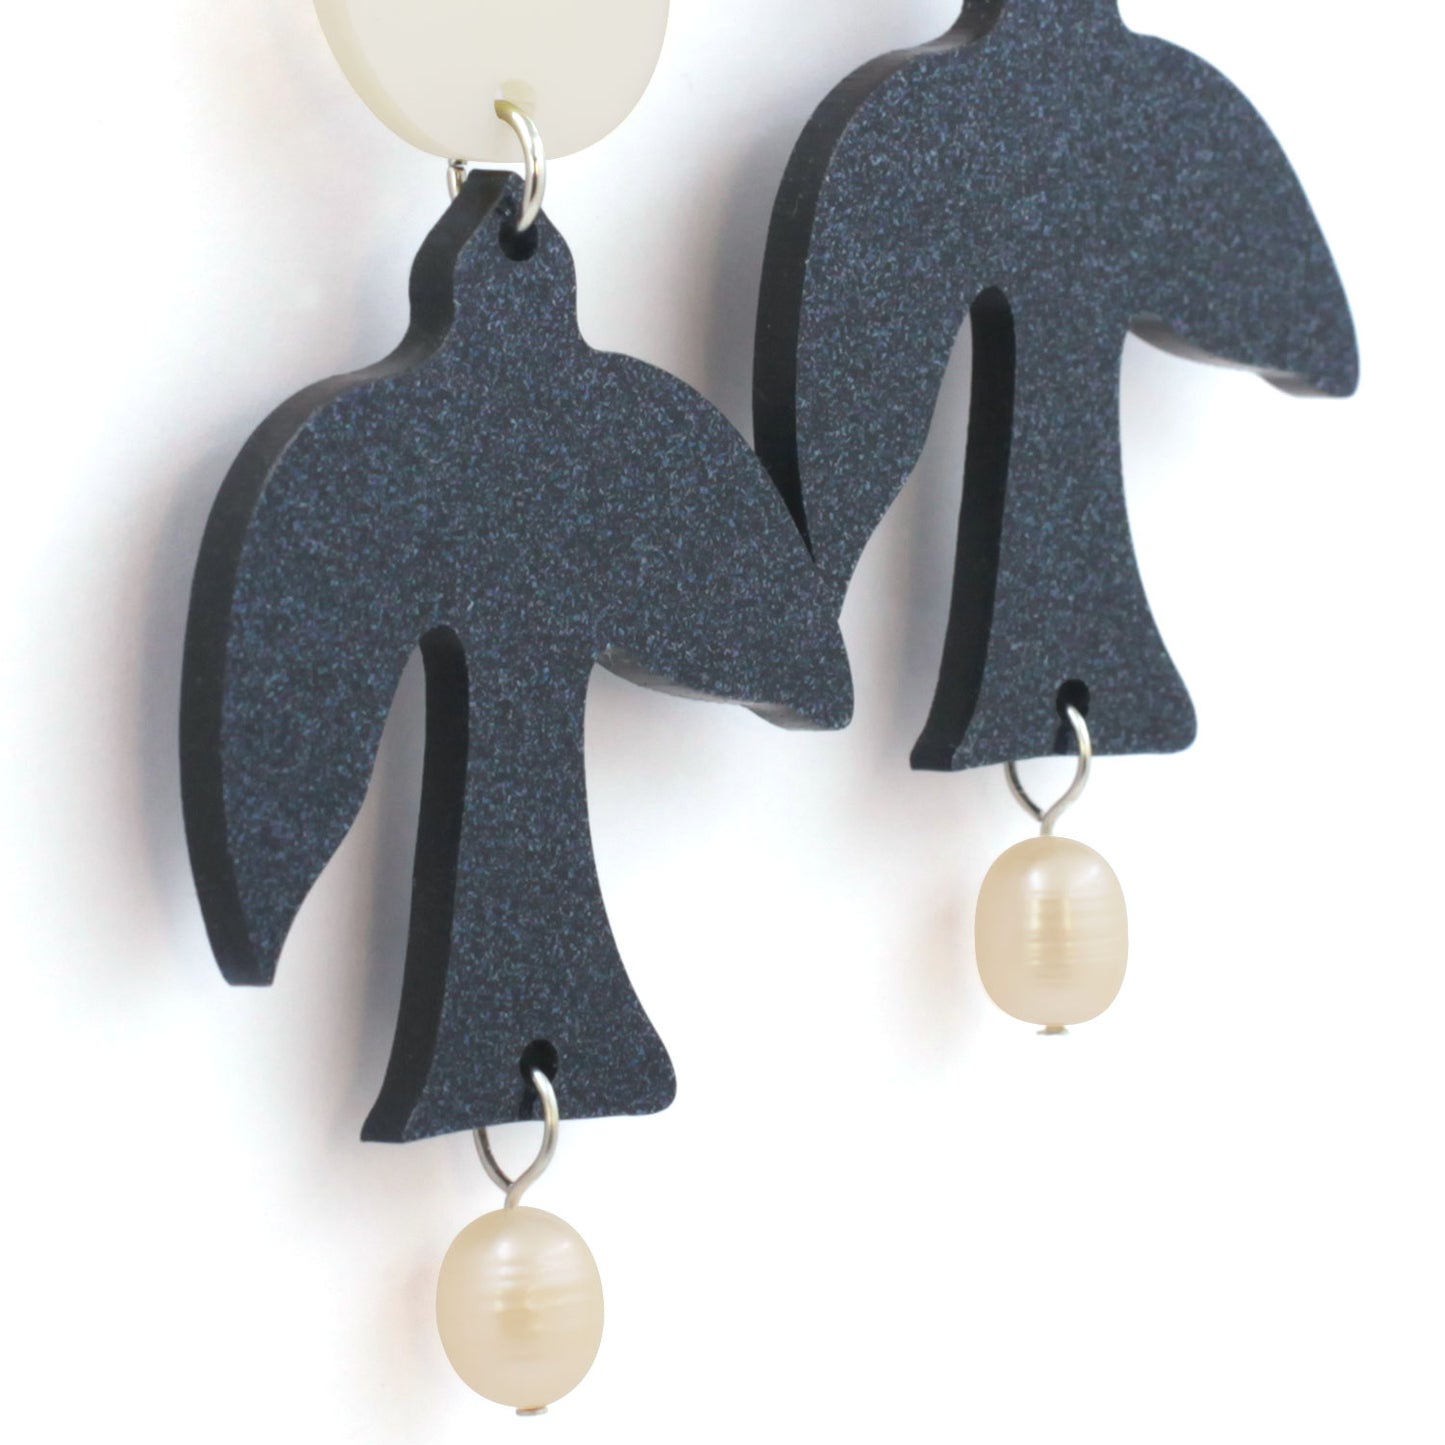 This is a close up of a pair of earrings. there are glitter dark blue birds with two freshwater pearls hanging from the tail and a white round piece on top. the background is white.